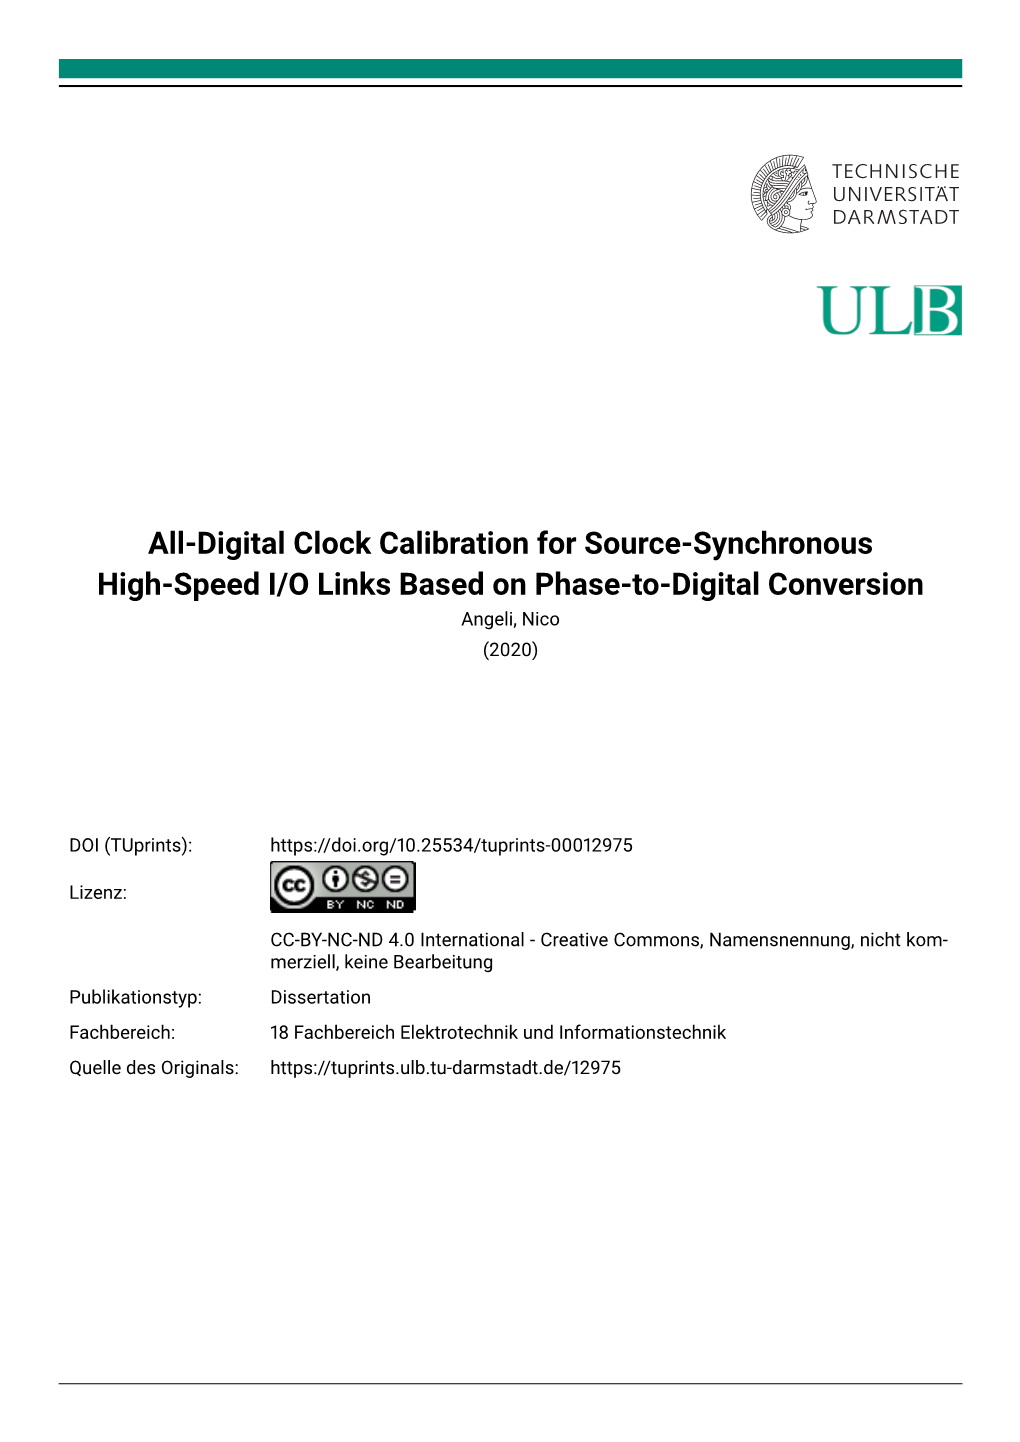 All-Digital Clock Calibration for Source-Synchronous High-Speed I/O Links Based on Phase-To-Digital Conversion Angeli, Nico (2020)